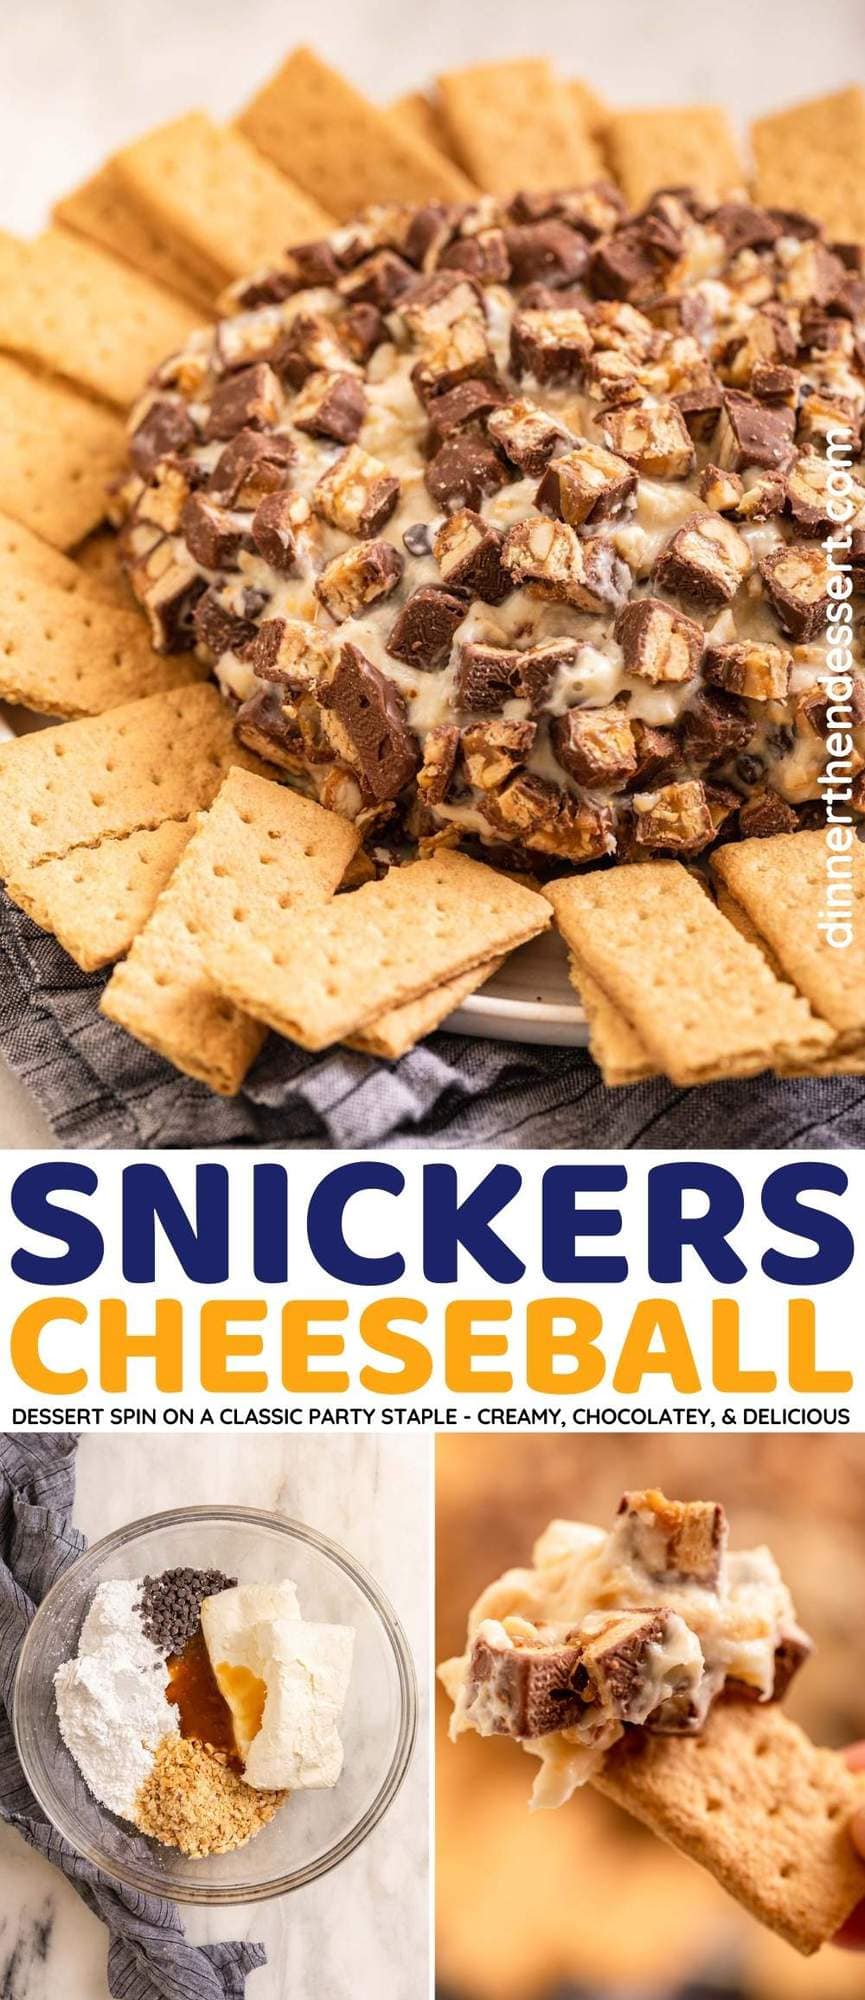 Snickers Cheeseball collage